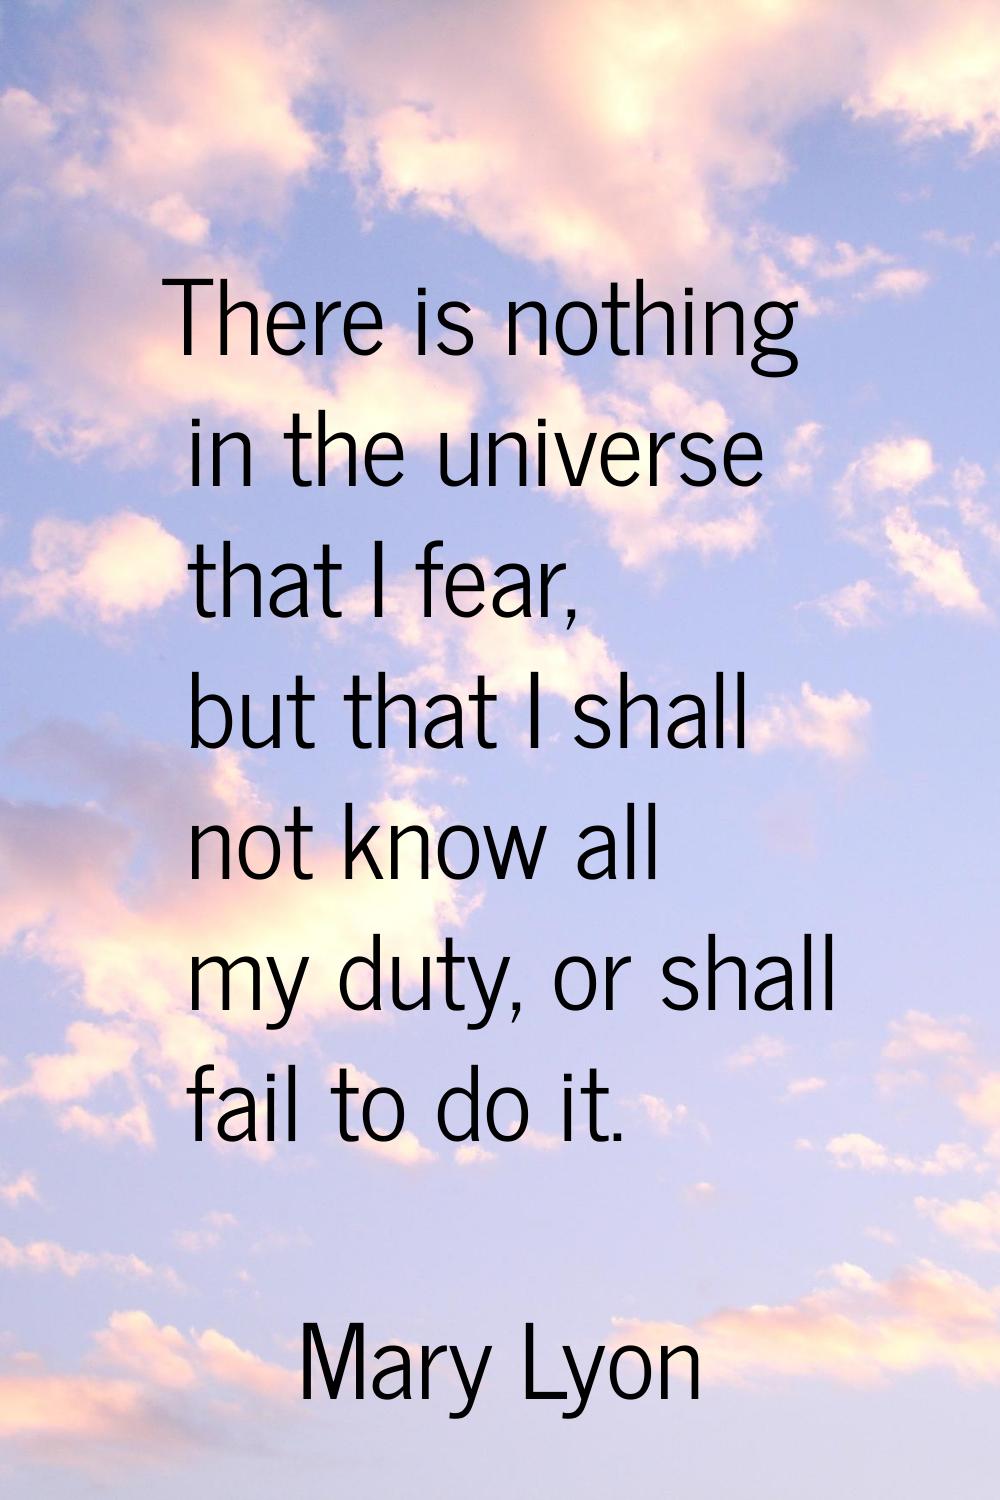 There is nothing in the universe that I fear, but that I shall not know all my duty, or shall fail 